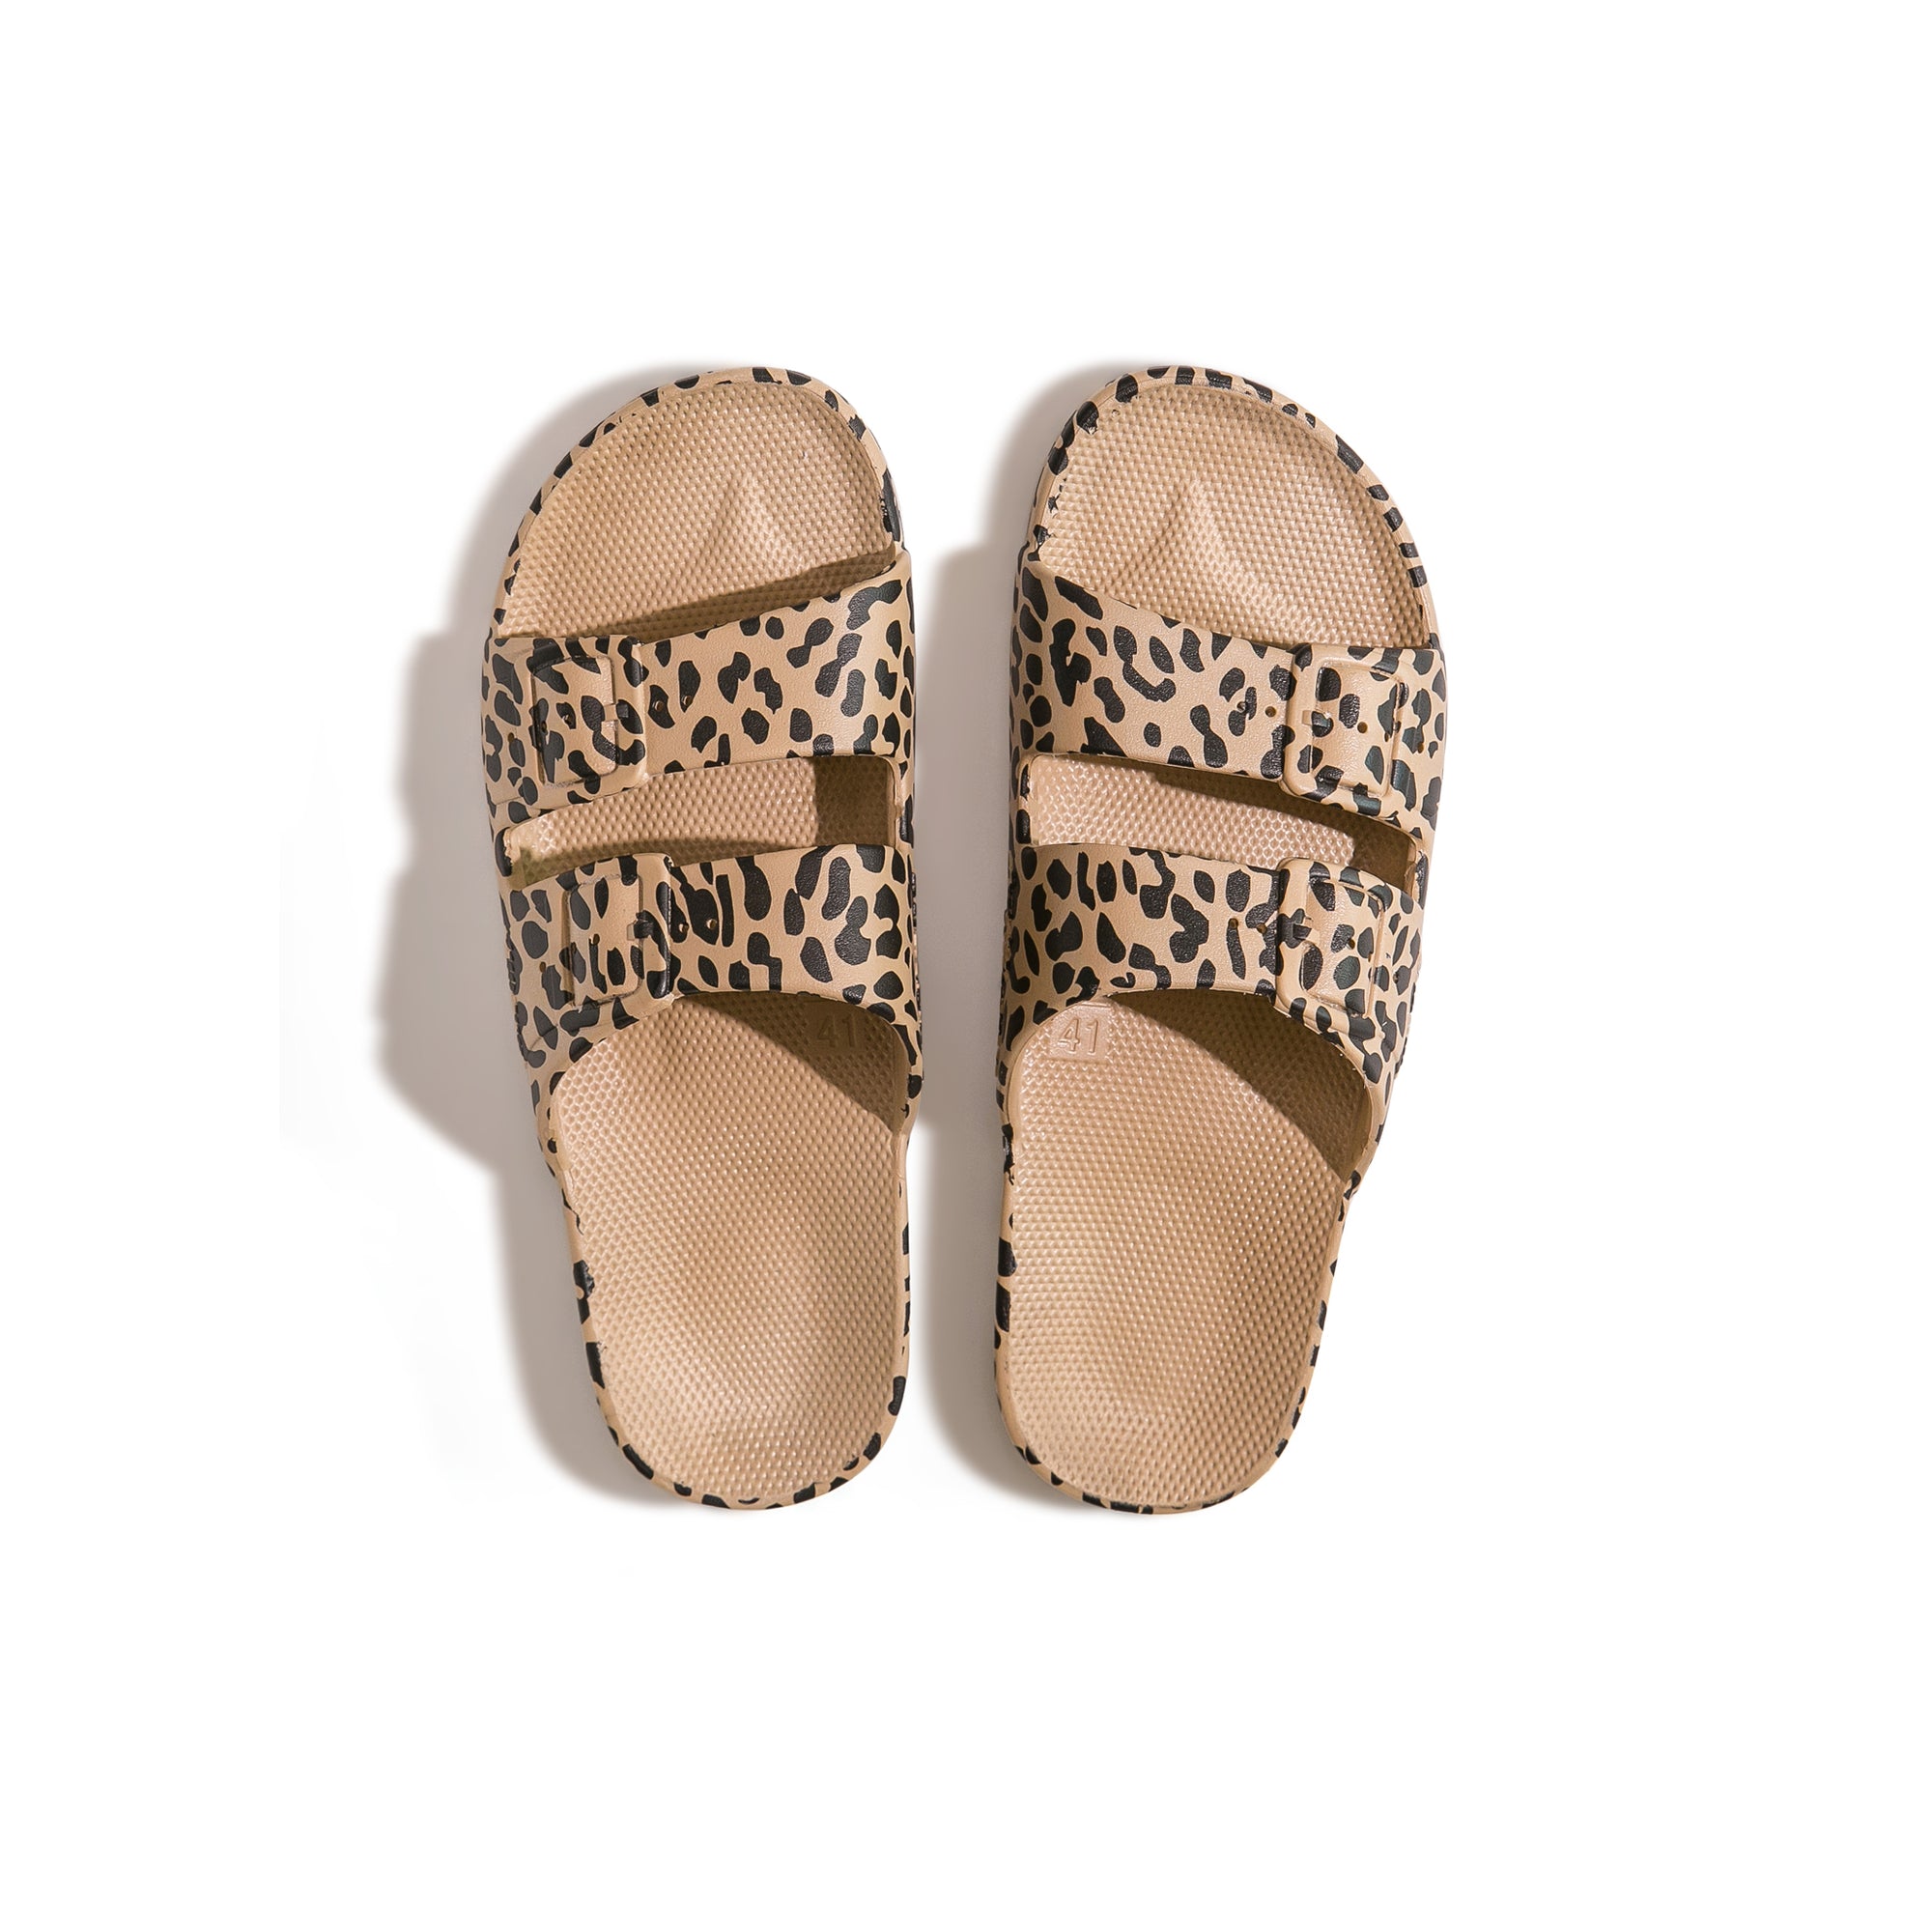 Parallel Culture Shoes and Fashion Online SLIDES FREEDOM MOSES FREEDOM MOSES PRINTS LEOPARD